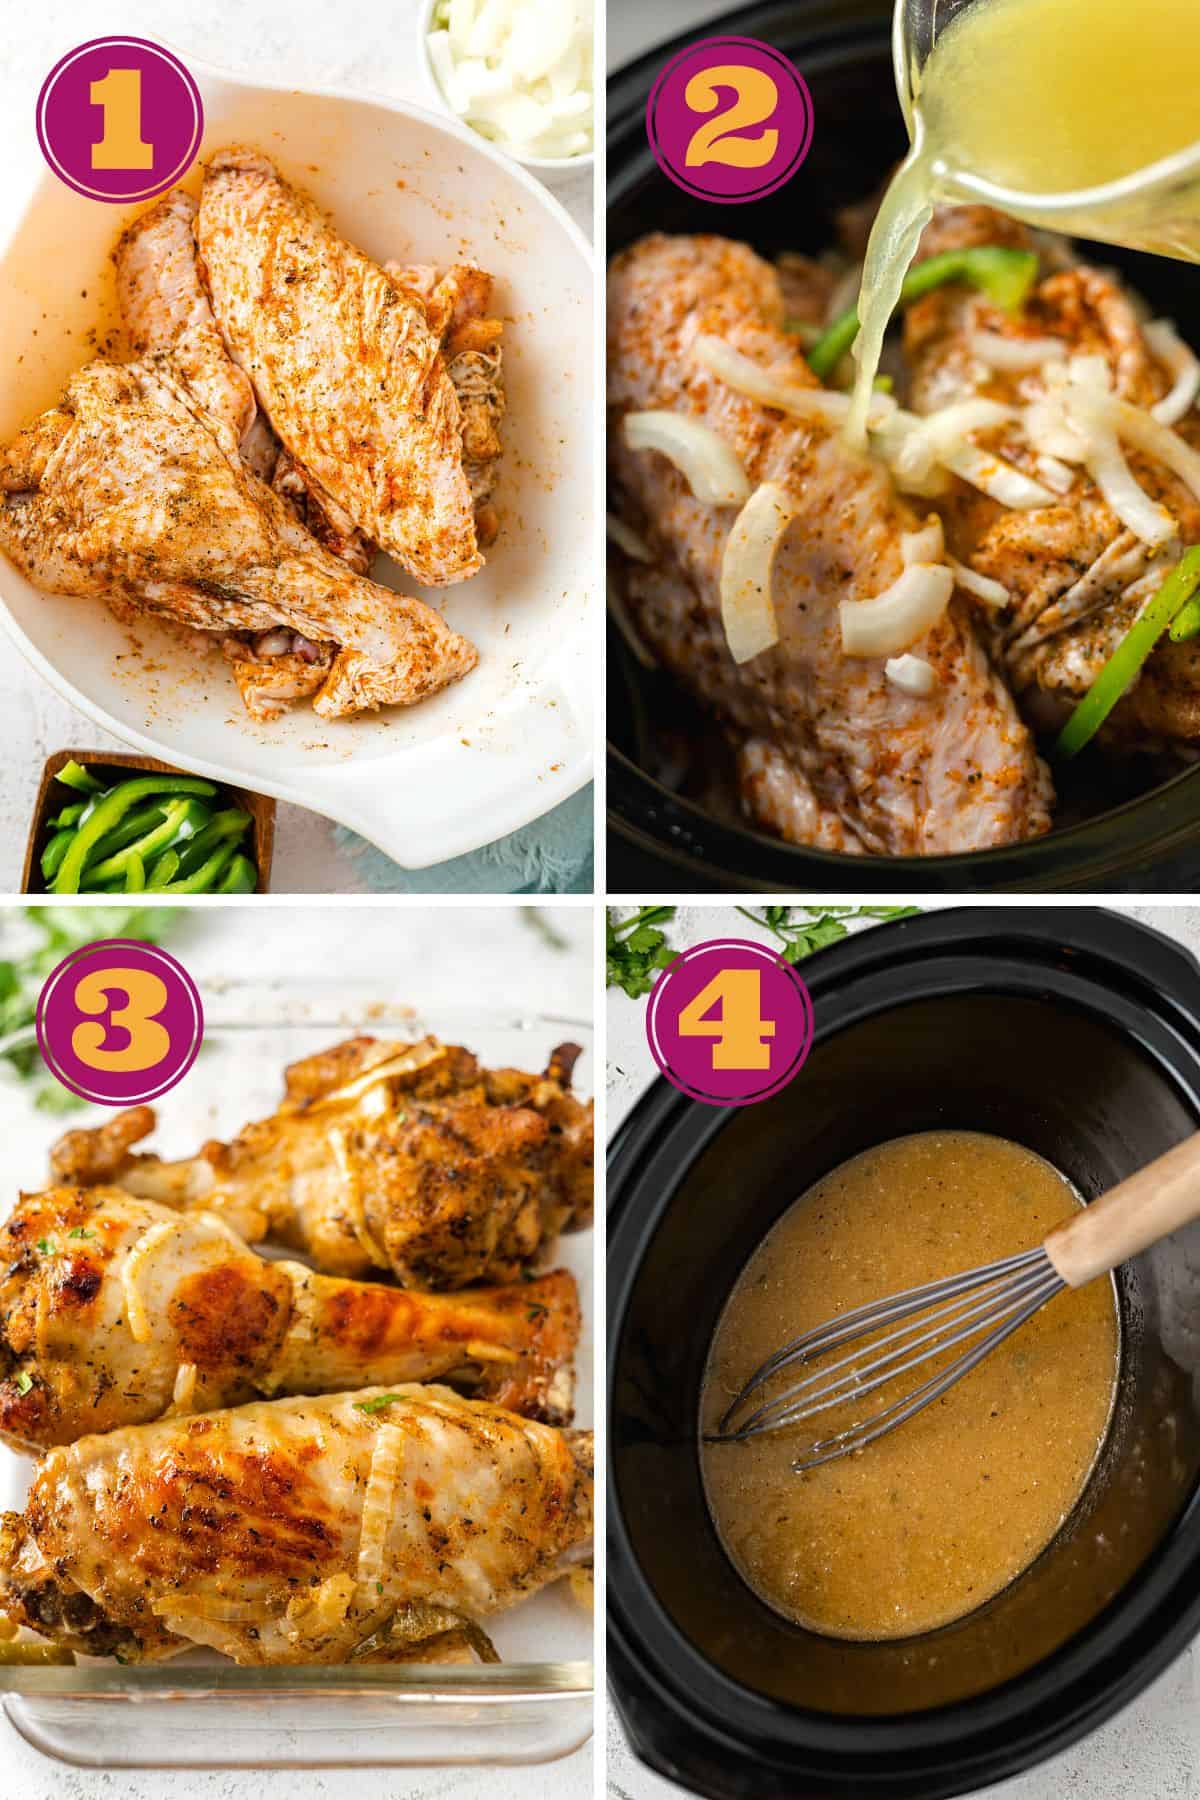 Four numbered images: first, raw turkey wings in a mixing bowl with seasonings; second, chicken broth being poured over turkey wings, bell peppers, and onions; third, cooked turkey legs in a serving dish; and fourth, a whisk stirring gravy in a crockpot